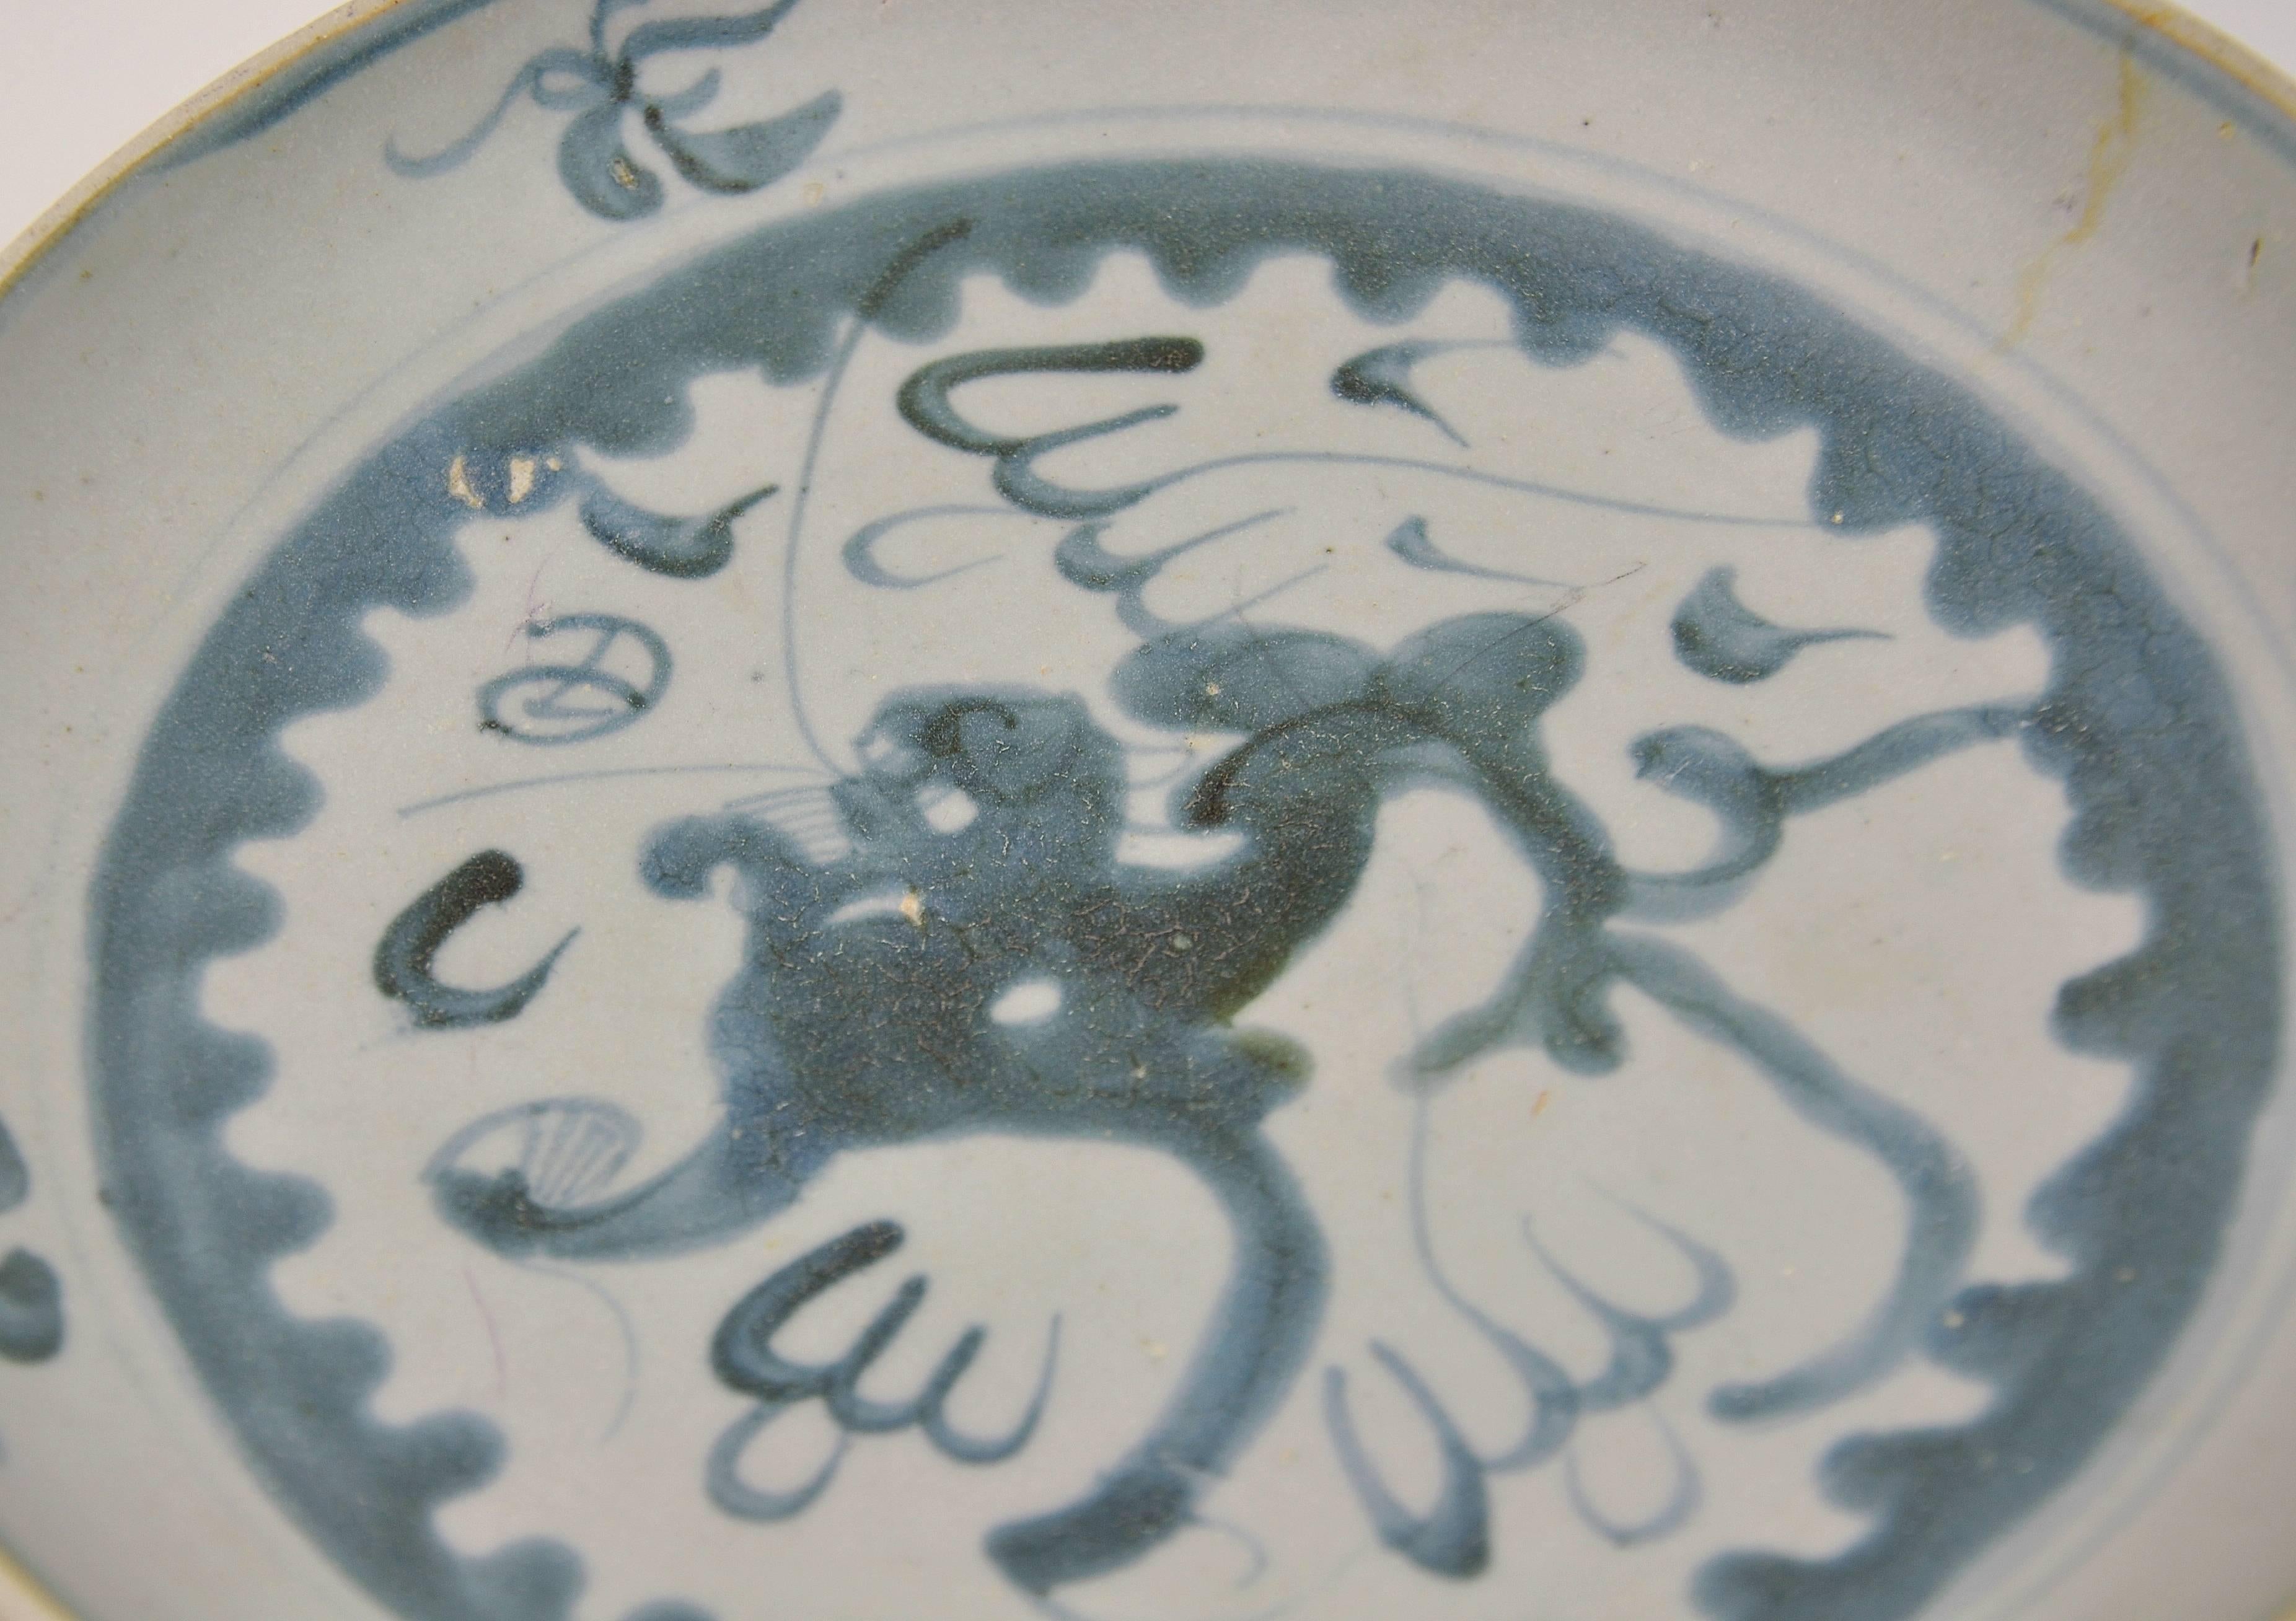 Hand-Painted Chinese Ming Dynasty Blue and White Porcelain Plate, Early 17th Century